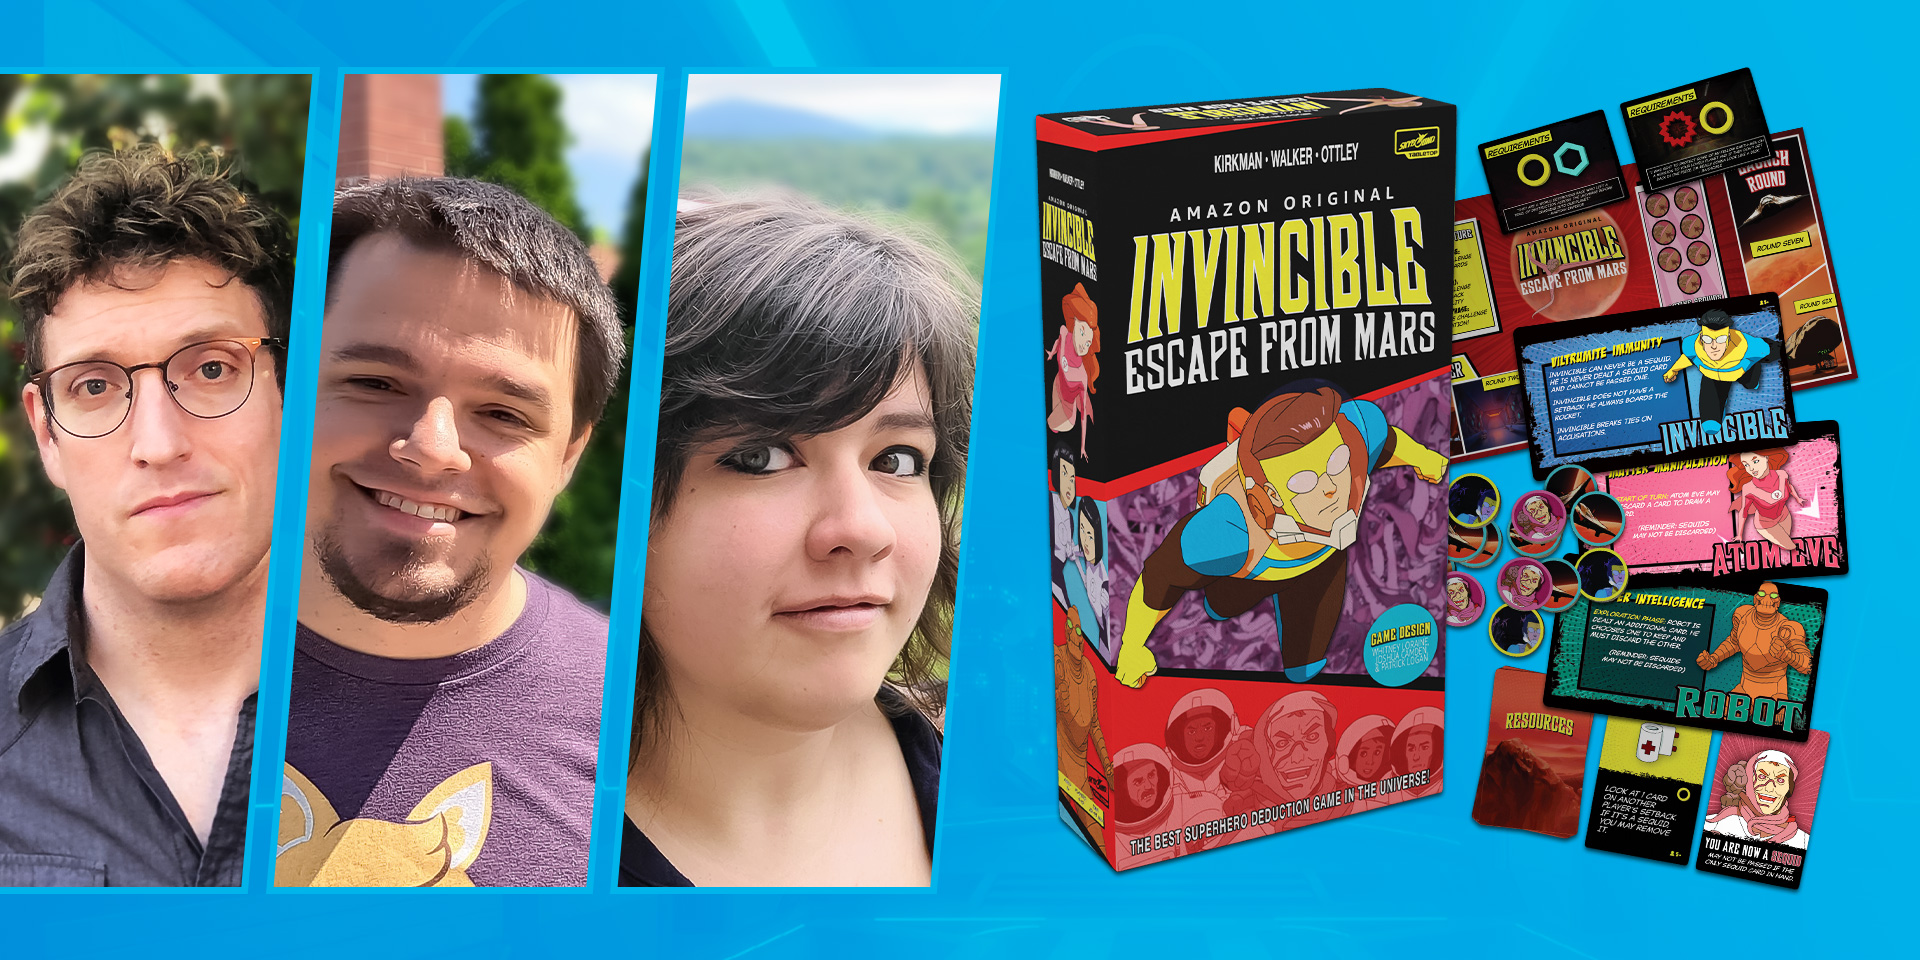 Game Designers Patrick Logan, Joshua Camden, and Whitney Loraine on Invincible: Escape from Mars